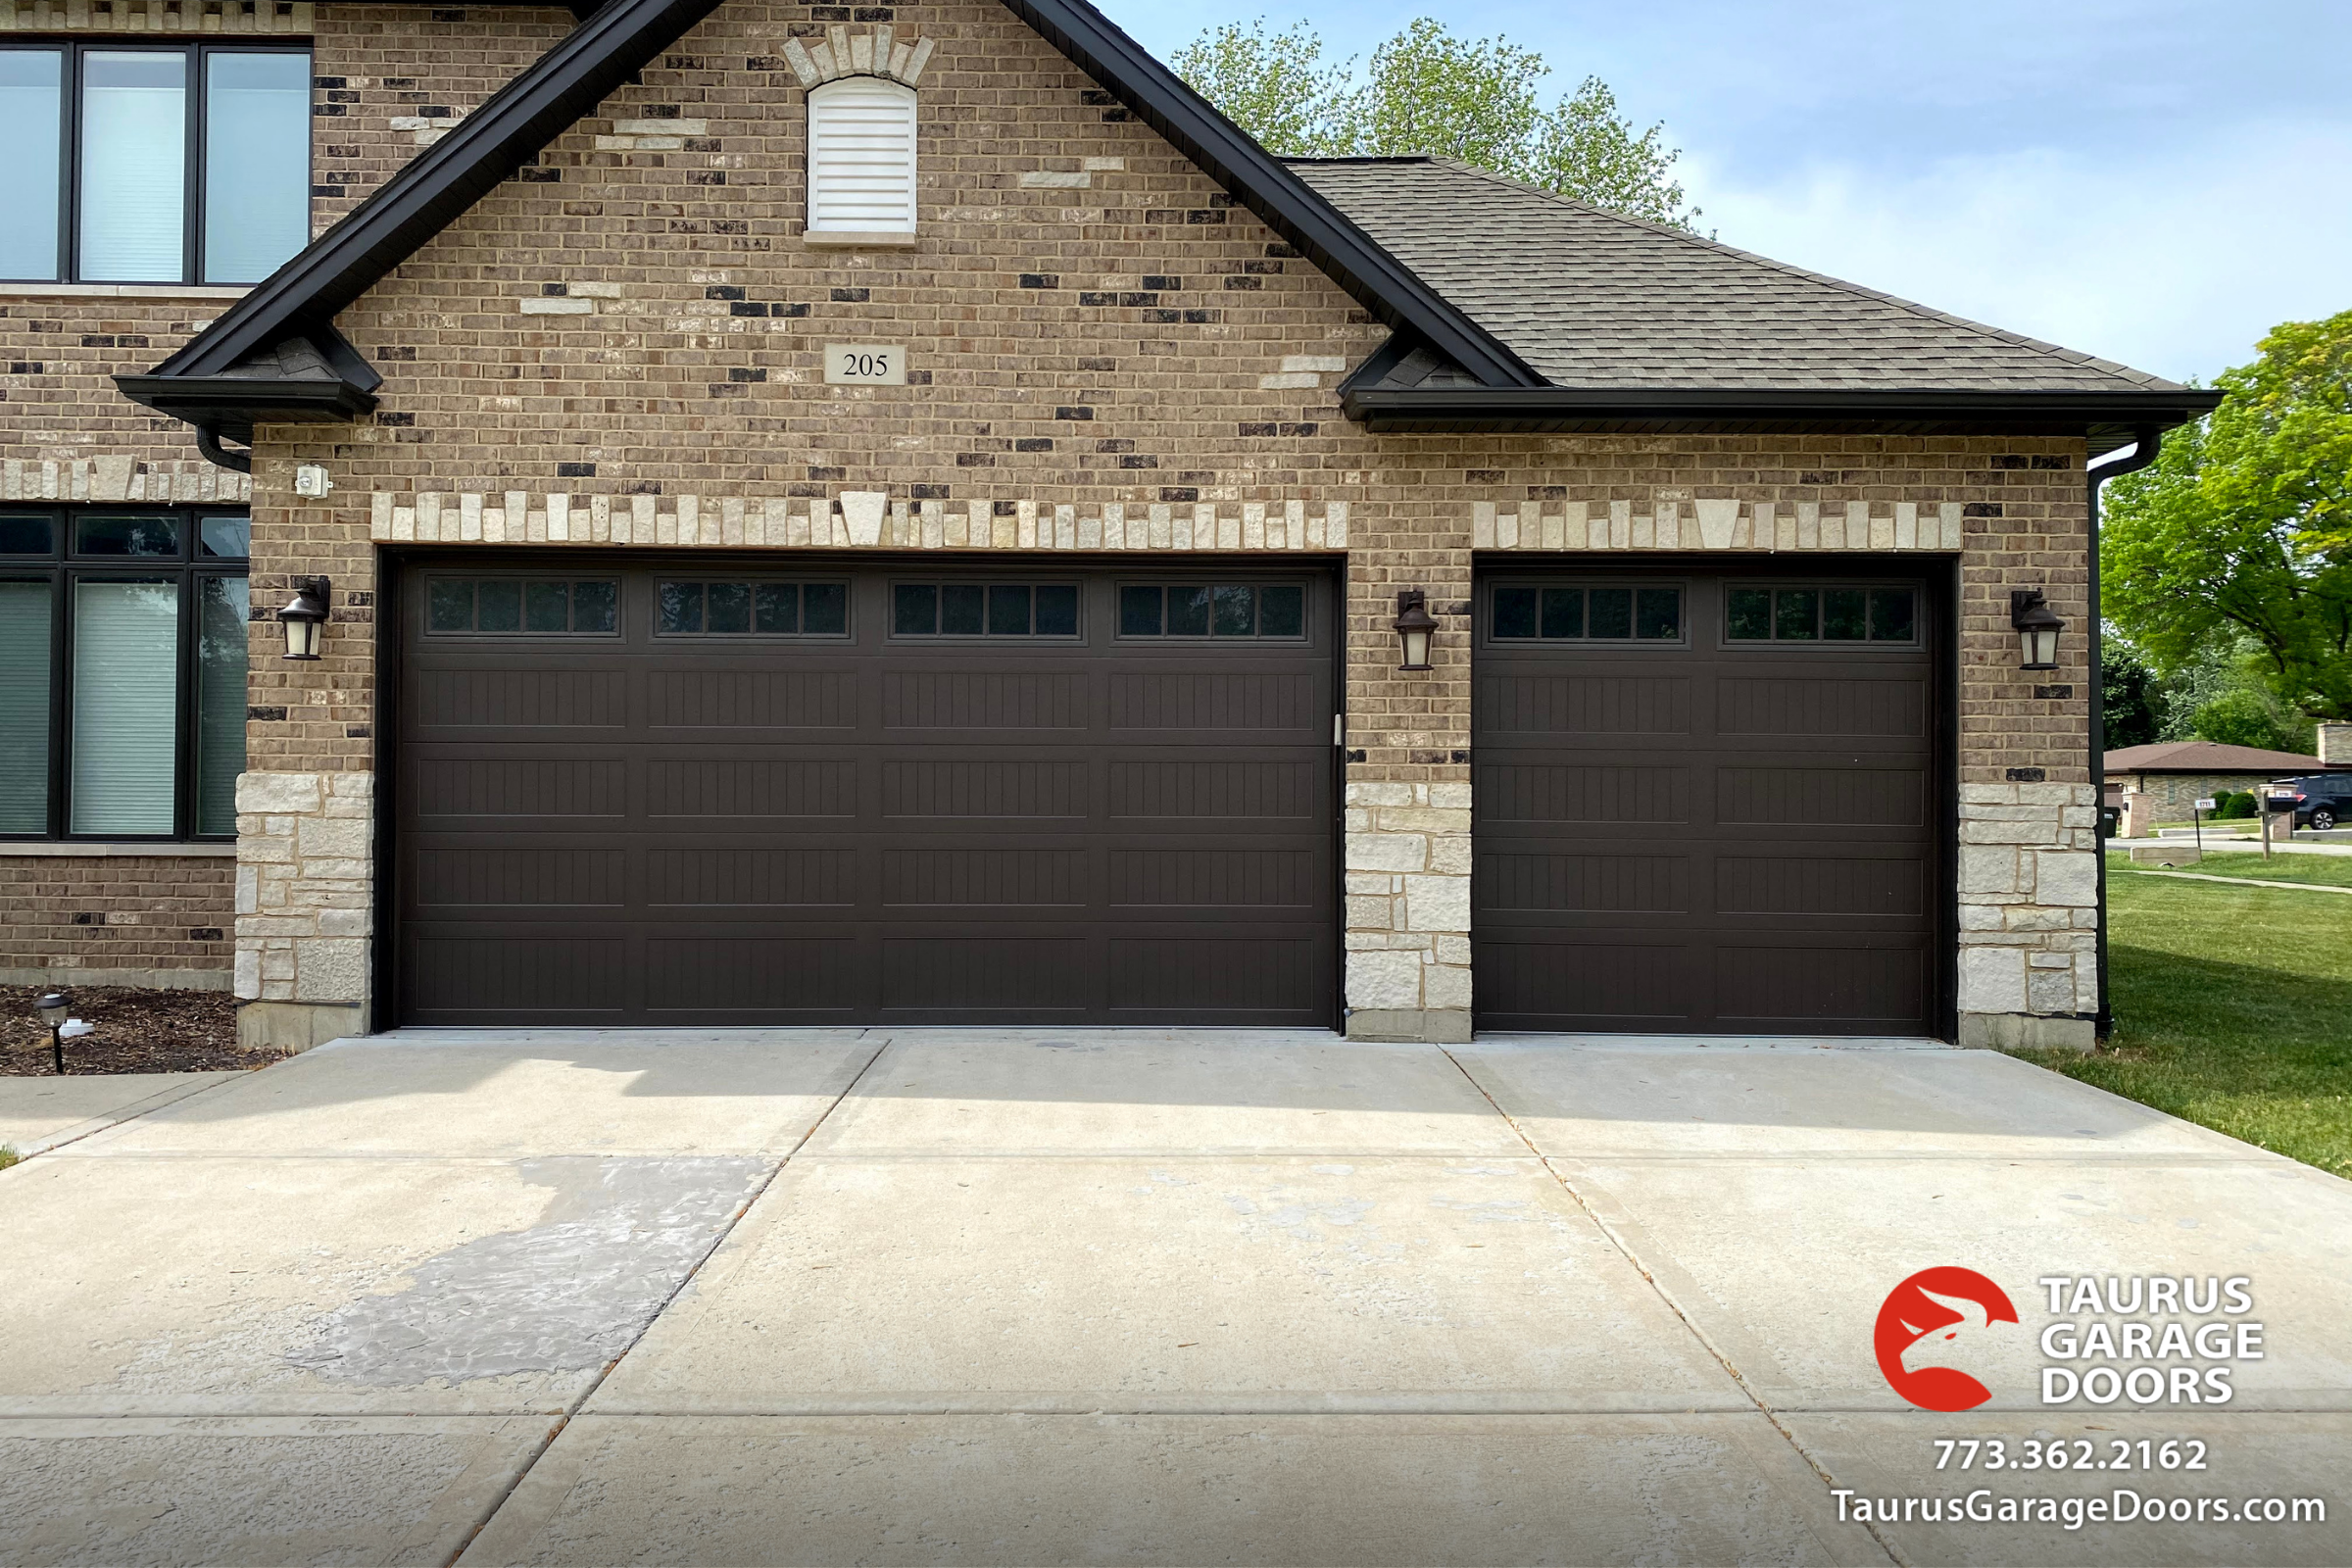 carriage-style-garage-door-in-brown-color-with-decorative-windows